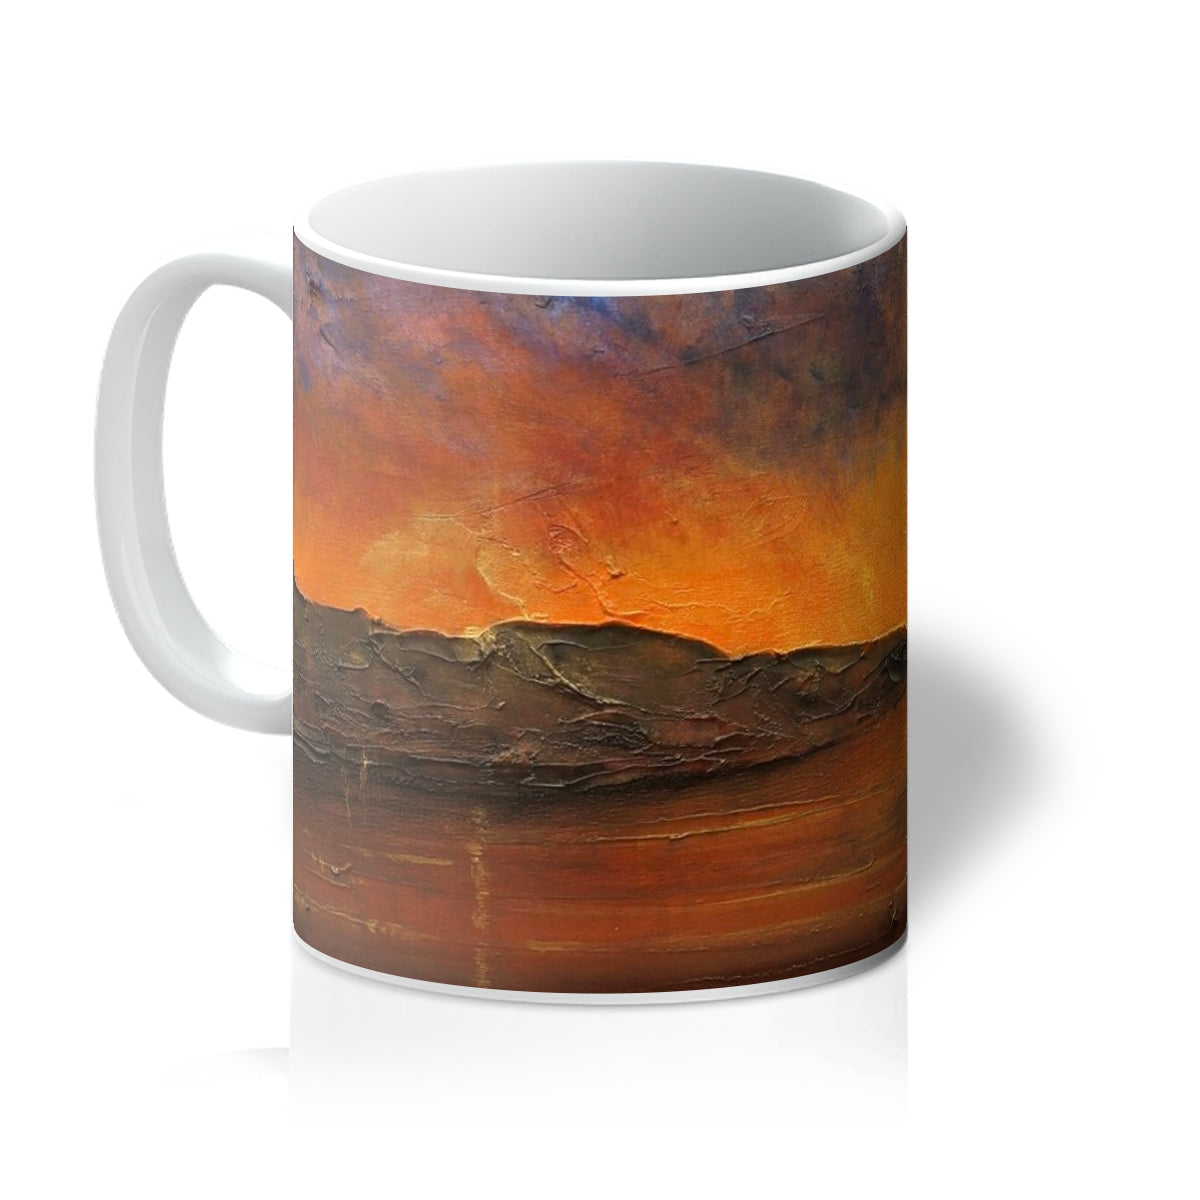 A Brooding Clyde Dusk Art Gifts Mug-Mugs-River Clyde Art Gallery-11oz-White-Paintings, Prints, Homeware, Art Gifts From Scotland By Scottish Artist Kevin Hunter